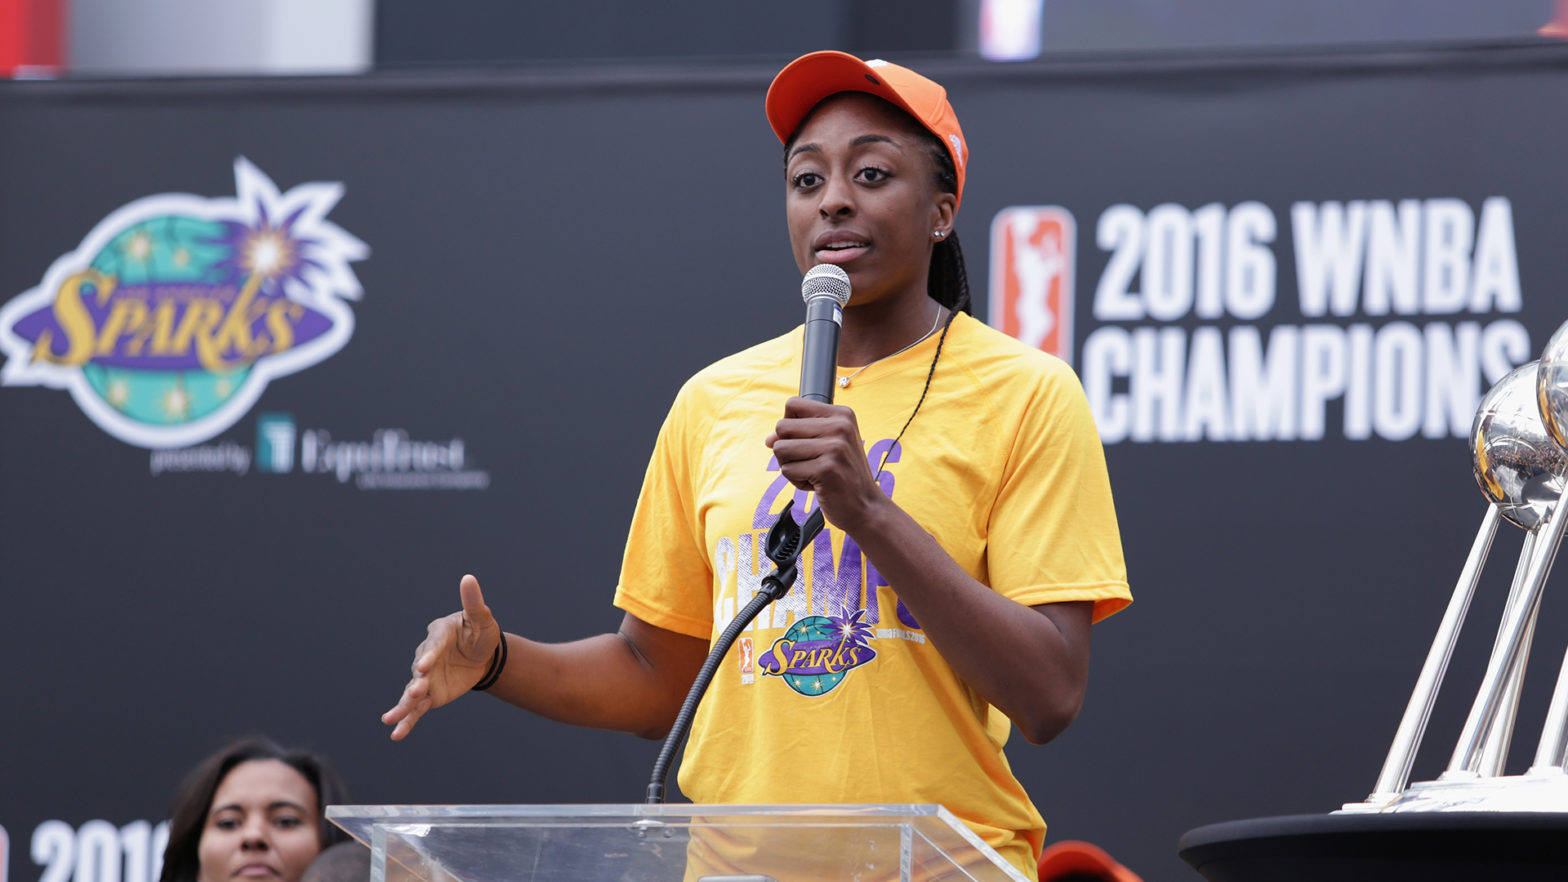 WNBA Players' Union Introduces New Strategy To Level The Playing Field For Pay Equity In Women's Sports